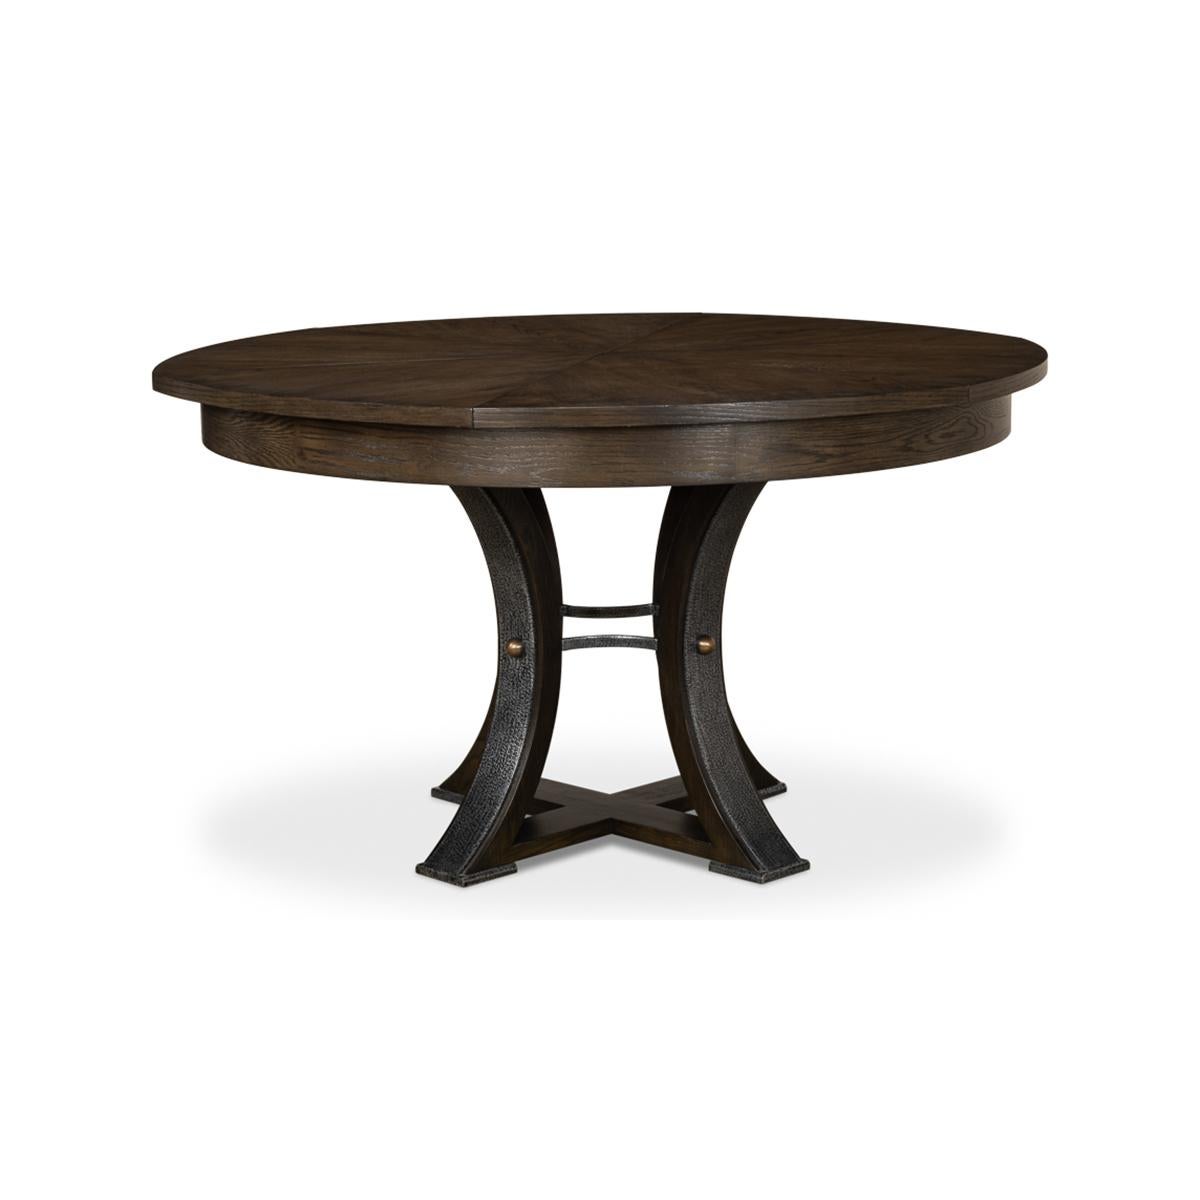 A modern industrial style jupe round extending dining room table. Wire brushed oak top with gunmetal iron accents to the simple geometric form base. The table opens and extends to 70